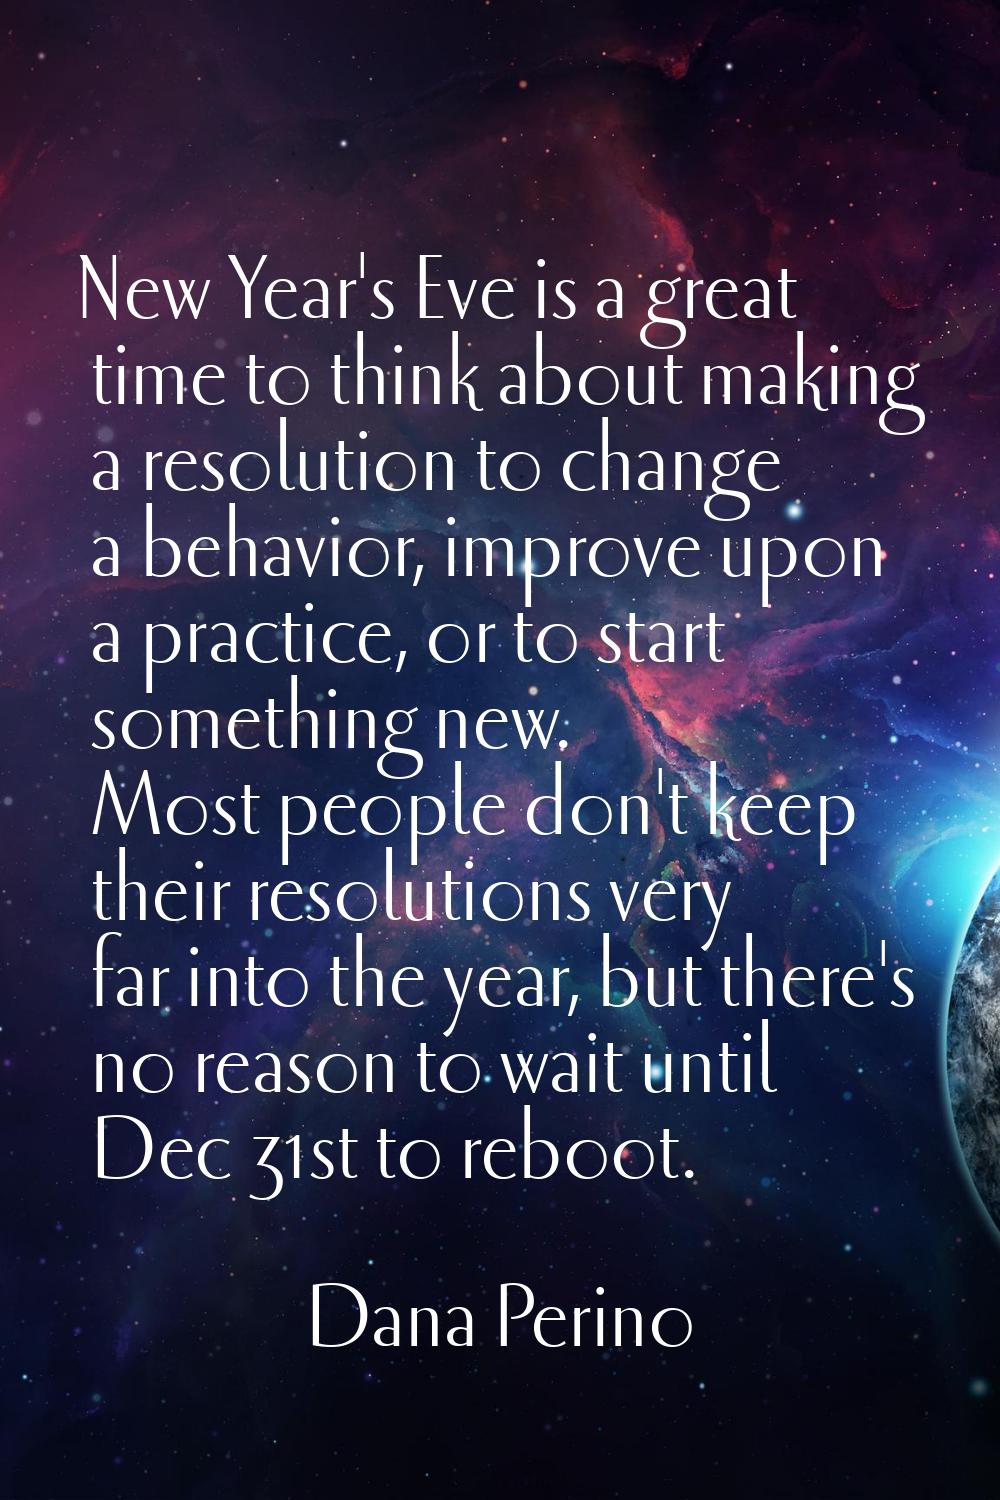 New Year's Eve is a great time to think about making a resolution to change a behavior, improve upo